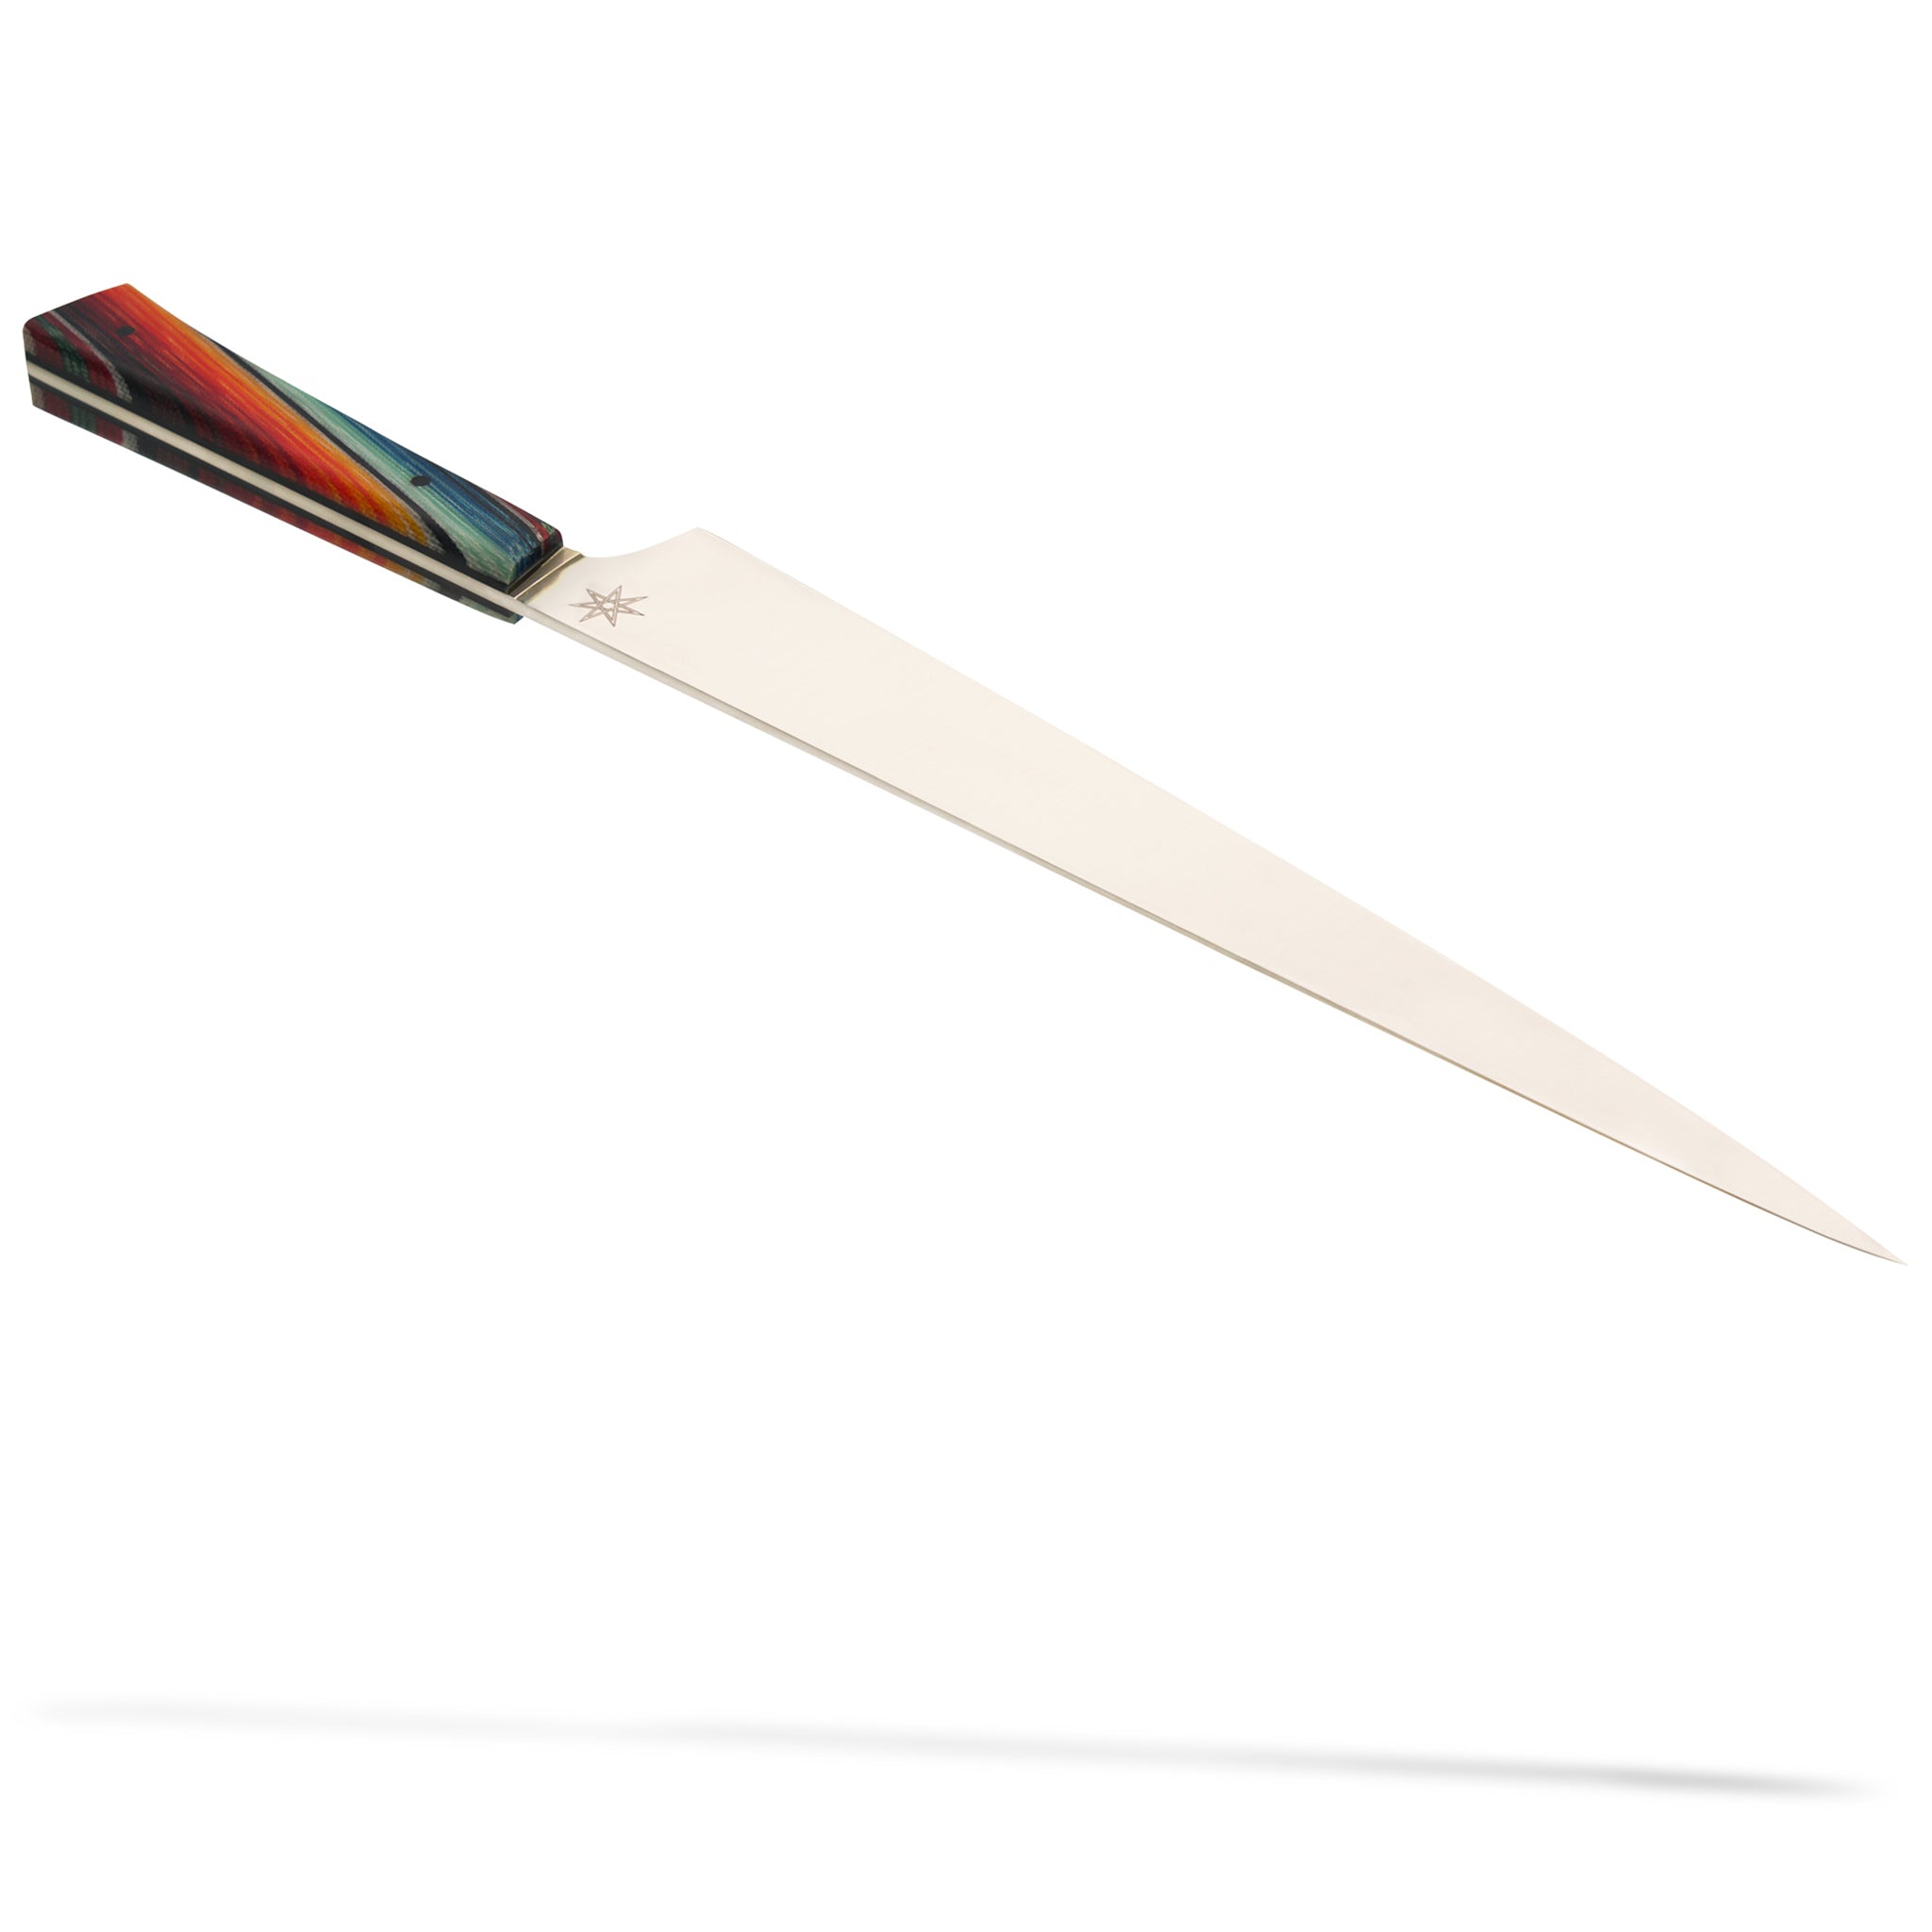 10" Slicer or carving stainless steel knife by Town Cutler featuring the Baja “Mexican Blanket Especial” handle. Handmade kitchen knife shown at an angle to show how the cool colorful knife handle lines up on both sides.